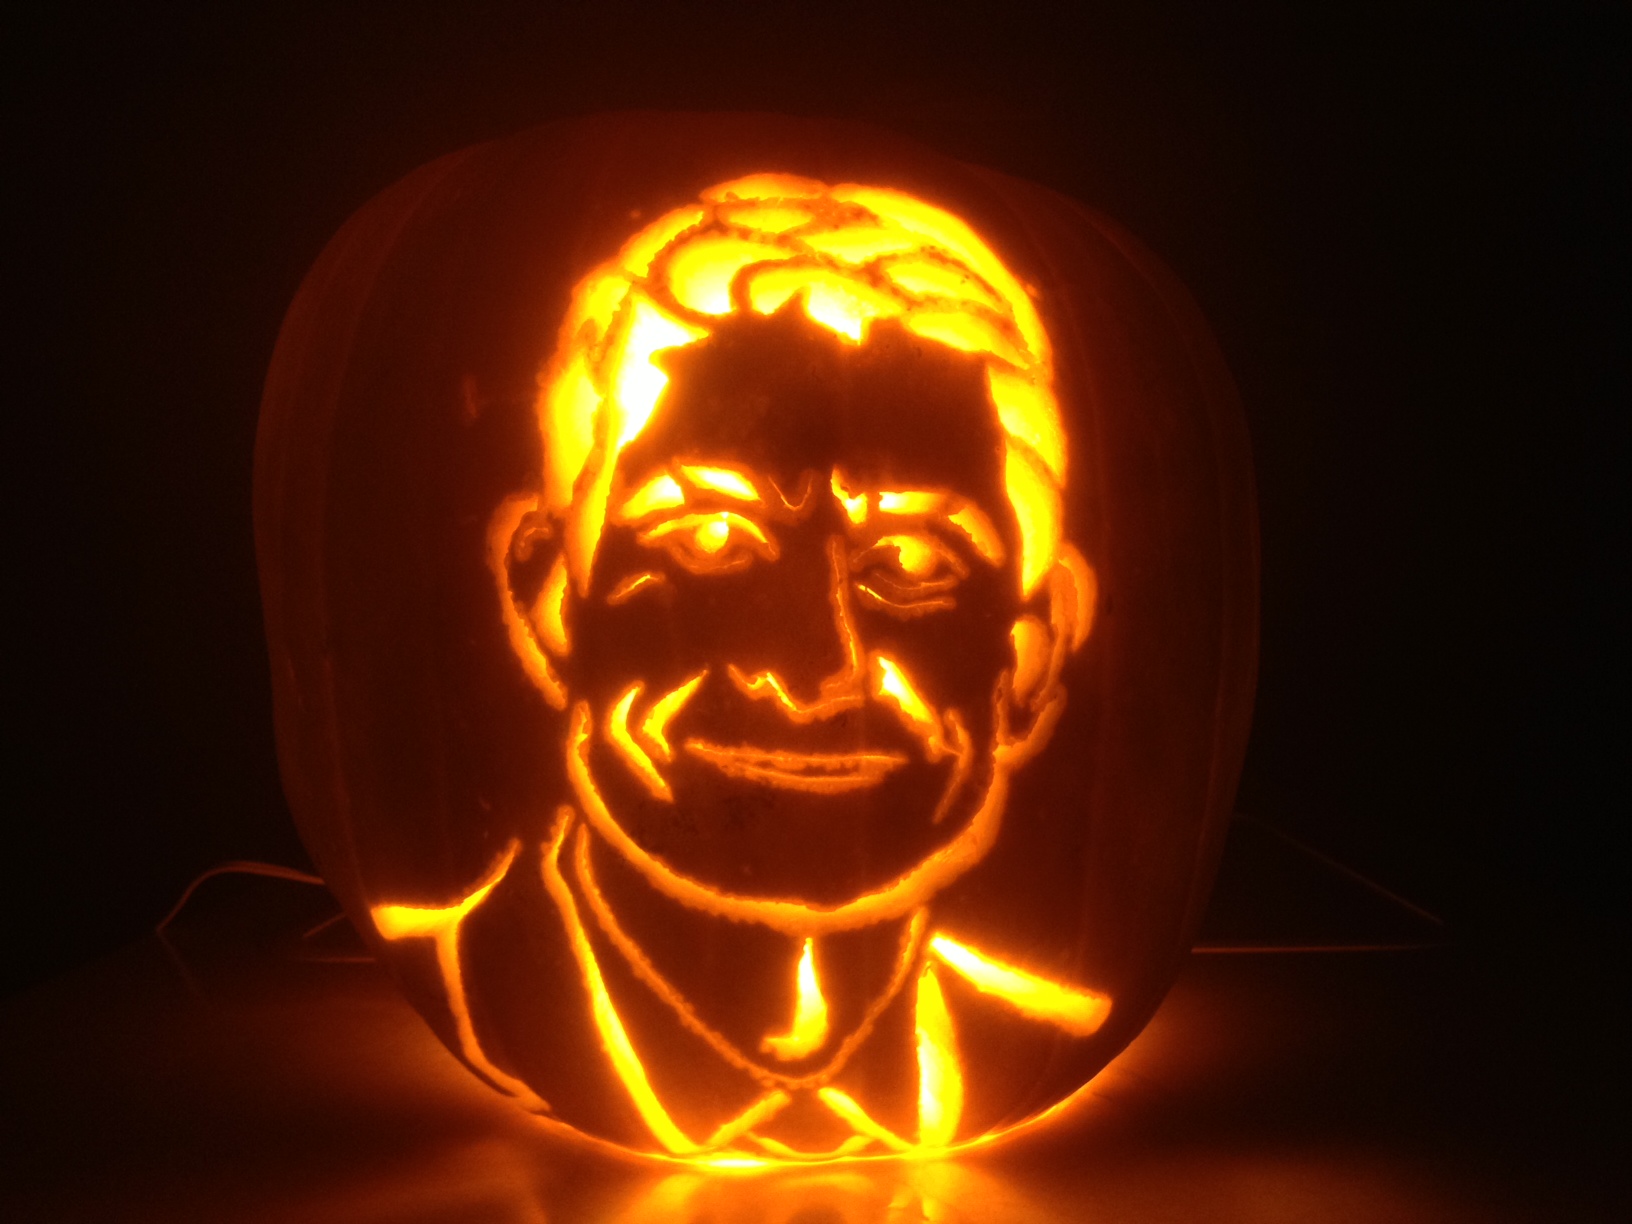 Republican Vice Presidential Candidate Paul Ryan's likeness carved into a jack-o-lantern.